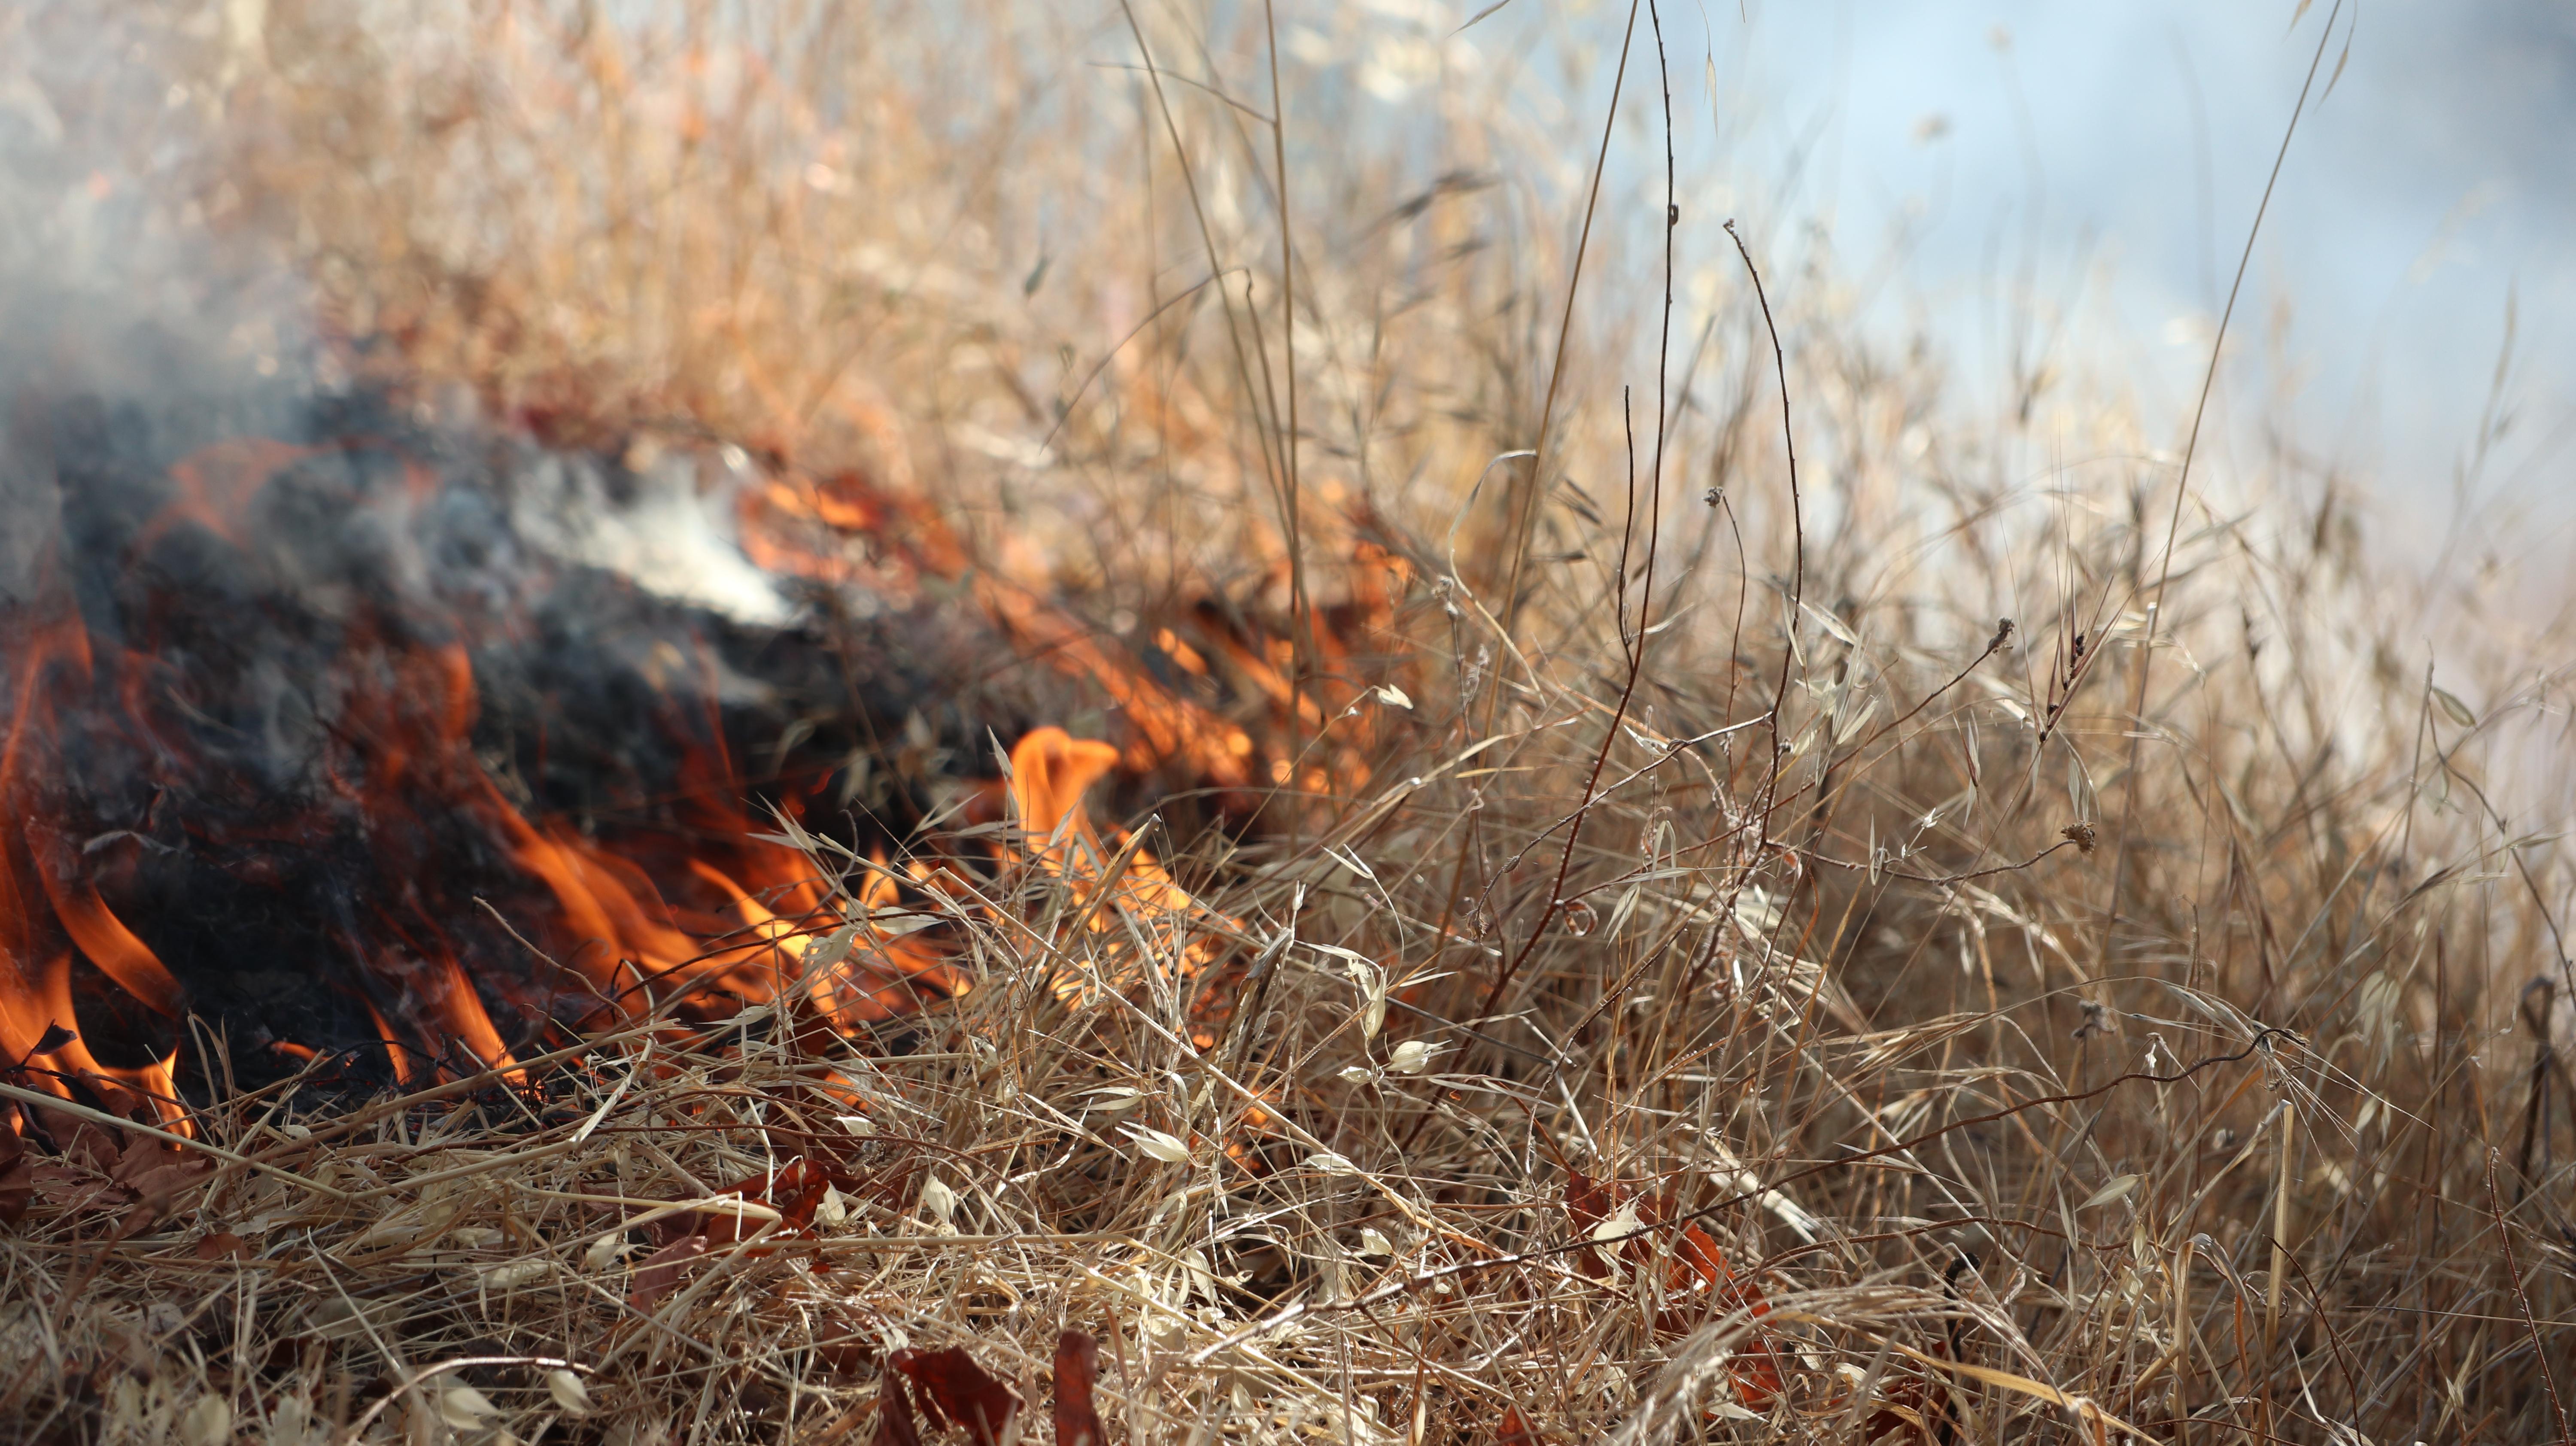 Close-up of burning invasive dead grass.